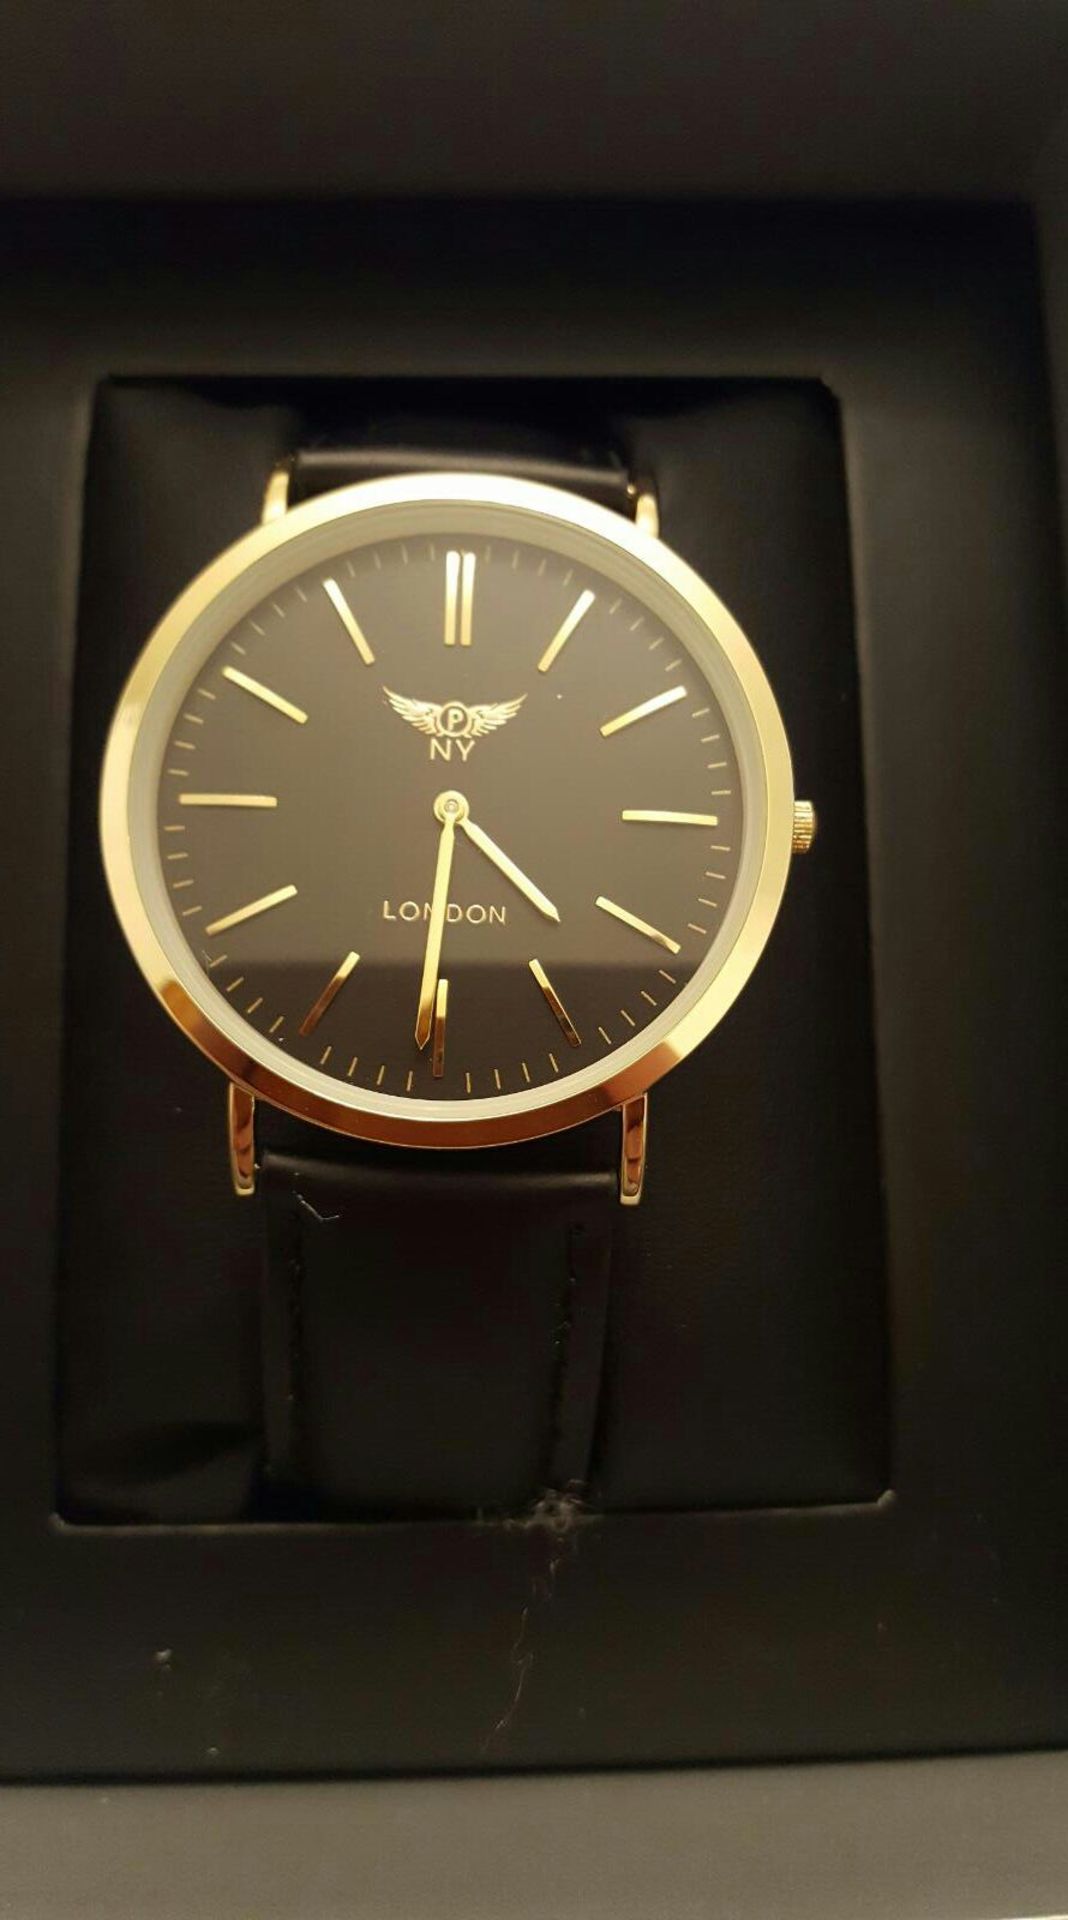 BRAND NEW NY LONDON GENTS SLIMLINE WATCH, SILVER WITH BLACK FACE AND BLACK LEATHER STRAP, WITH